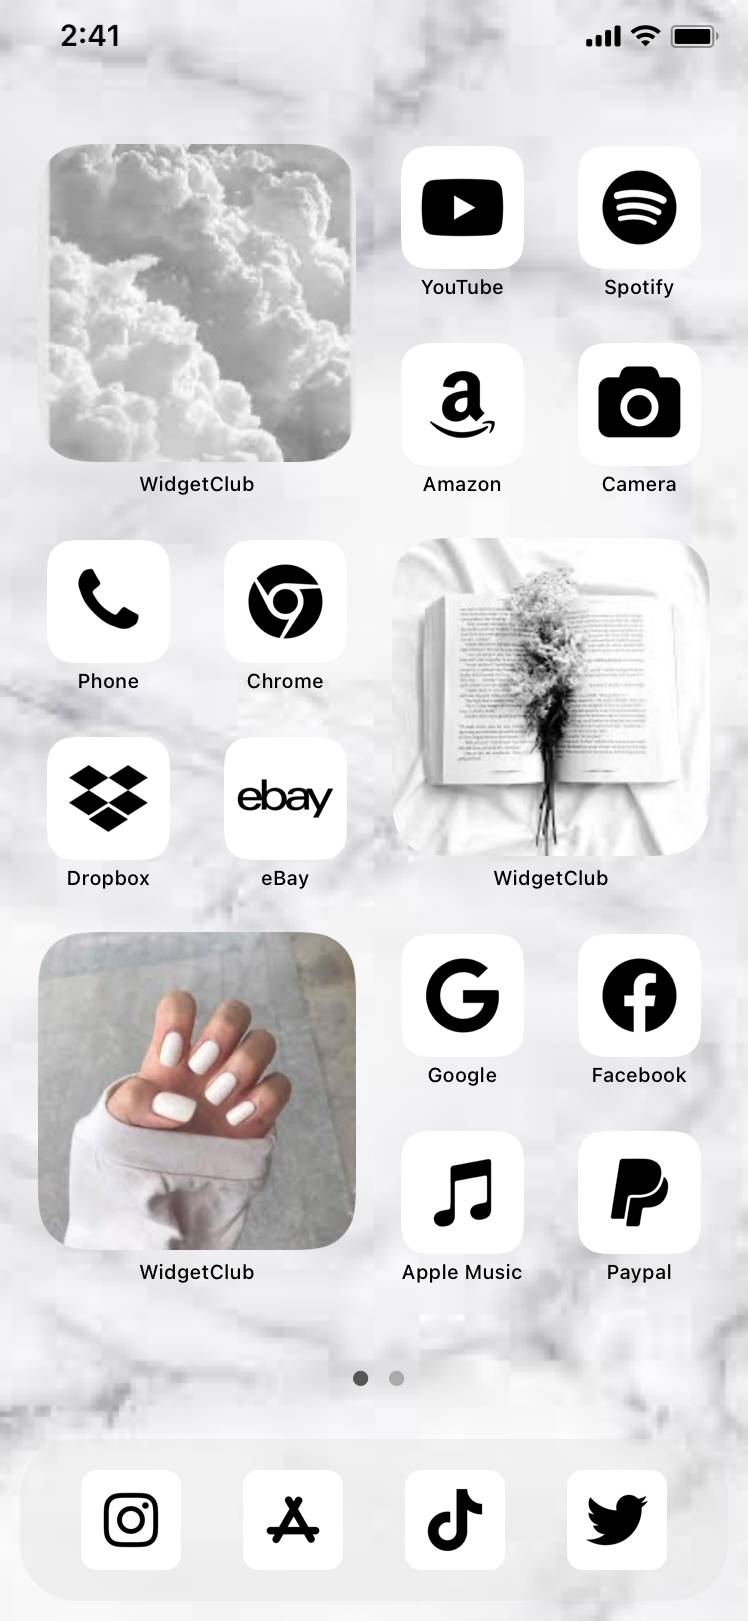 Aesthetic WhiteHome Screen ideas